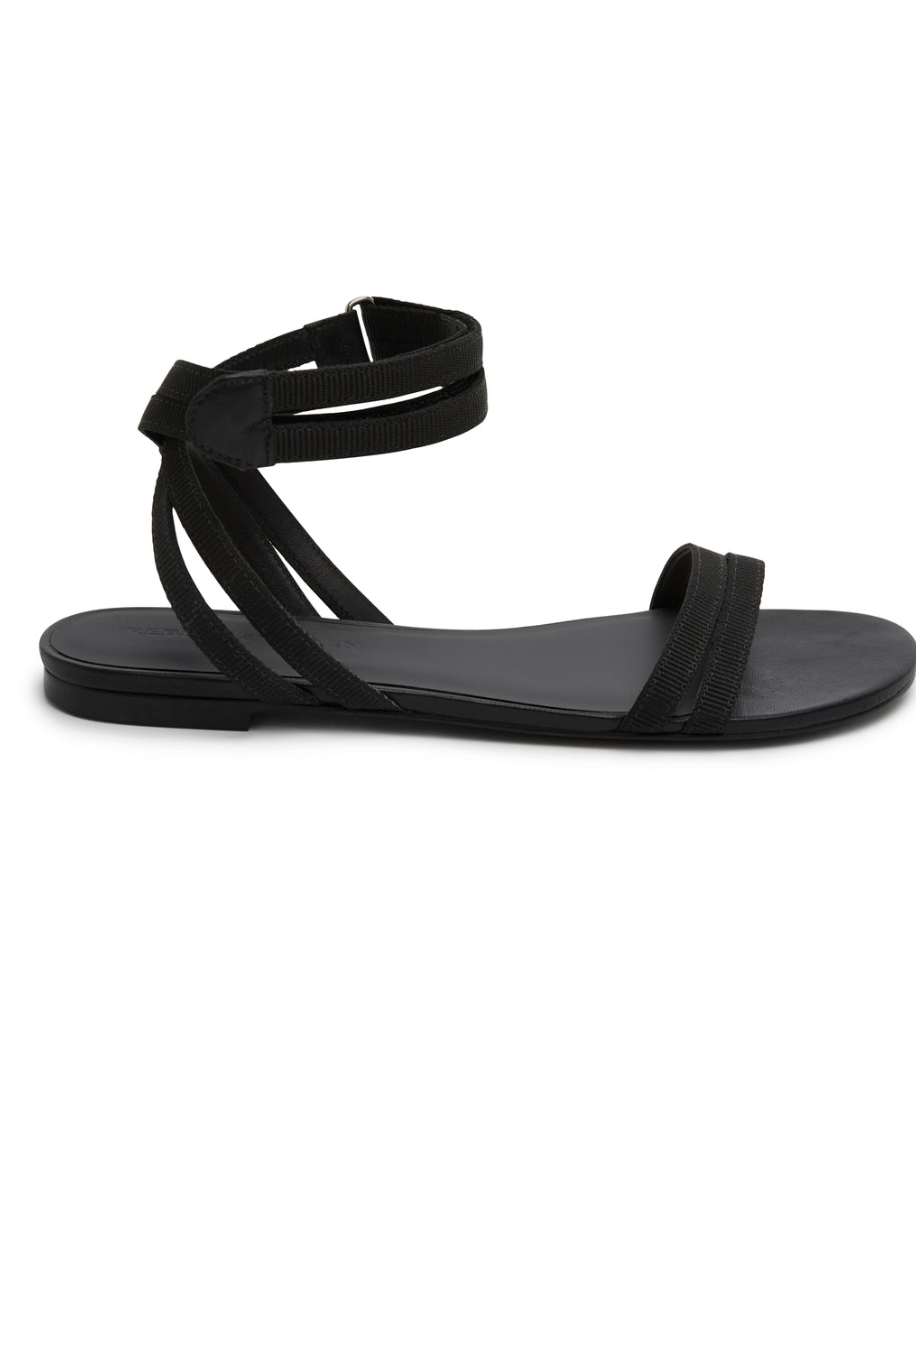 Summer Slide Black Flat Sandals For Women White/Black Rubber Slip On  Slipper With Thin Bottom, Wide Flat Design, Ideal For Outdoor Beach  Activities Available In Sizes EU35 46 With Box NO010 From